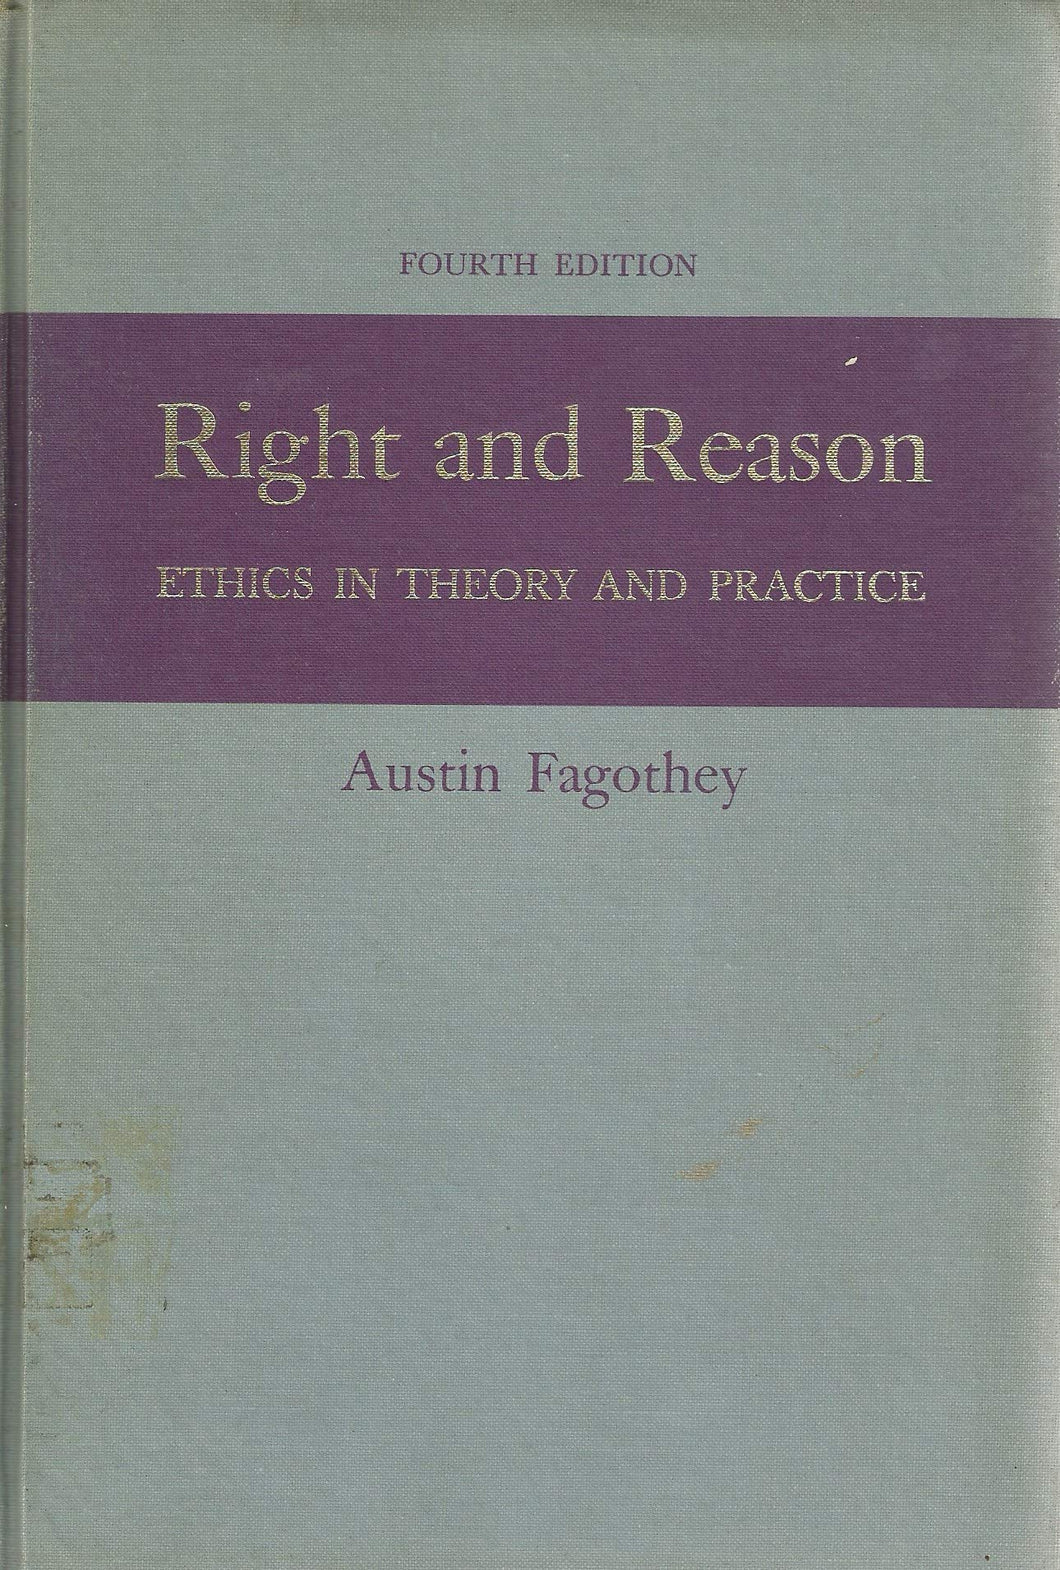 Right and reason: ethics in theory and practice. 4th ed